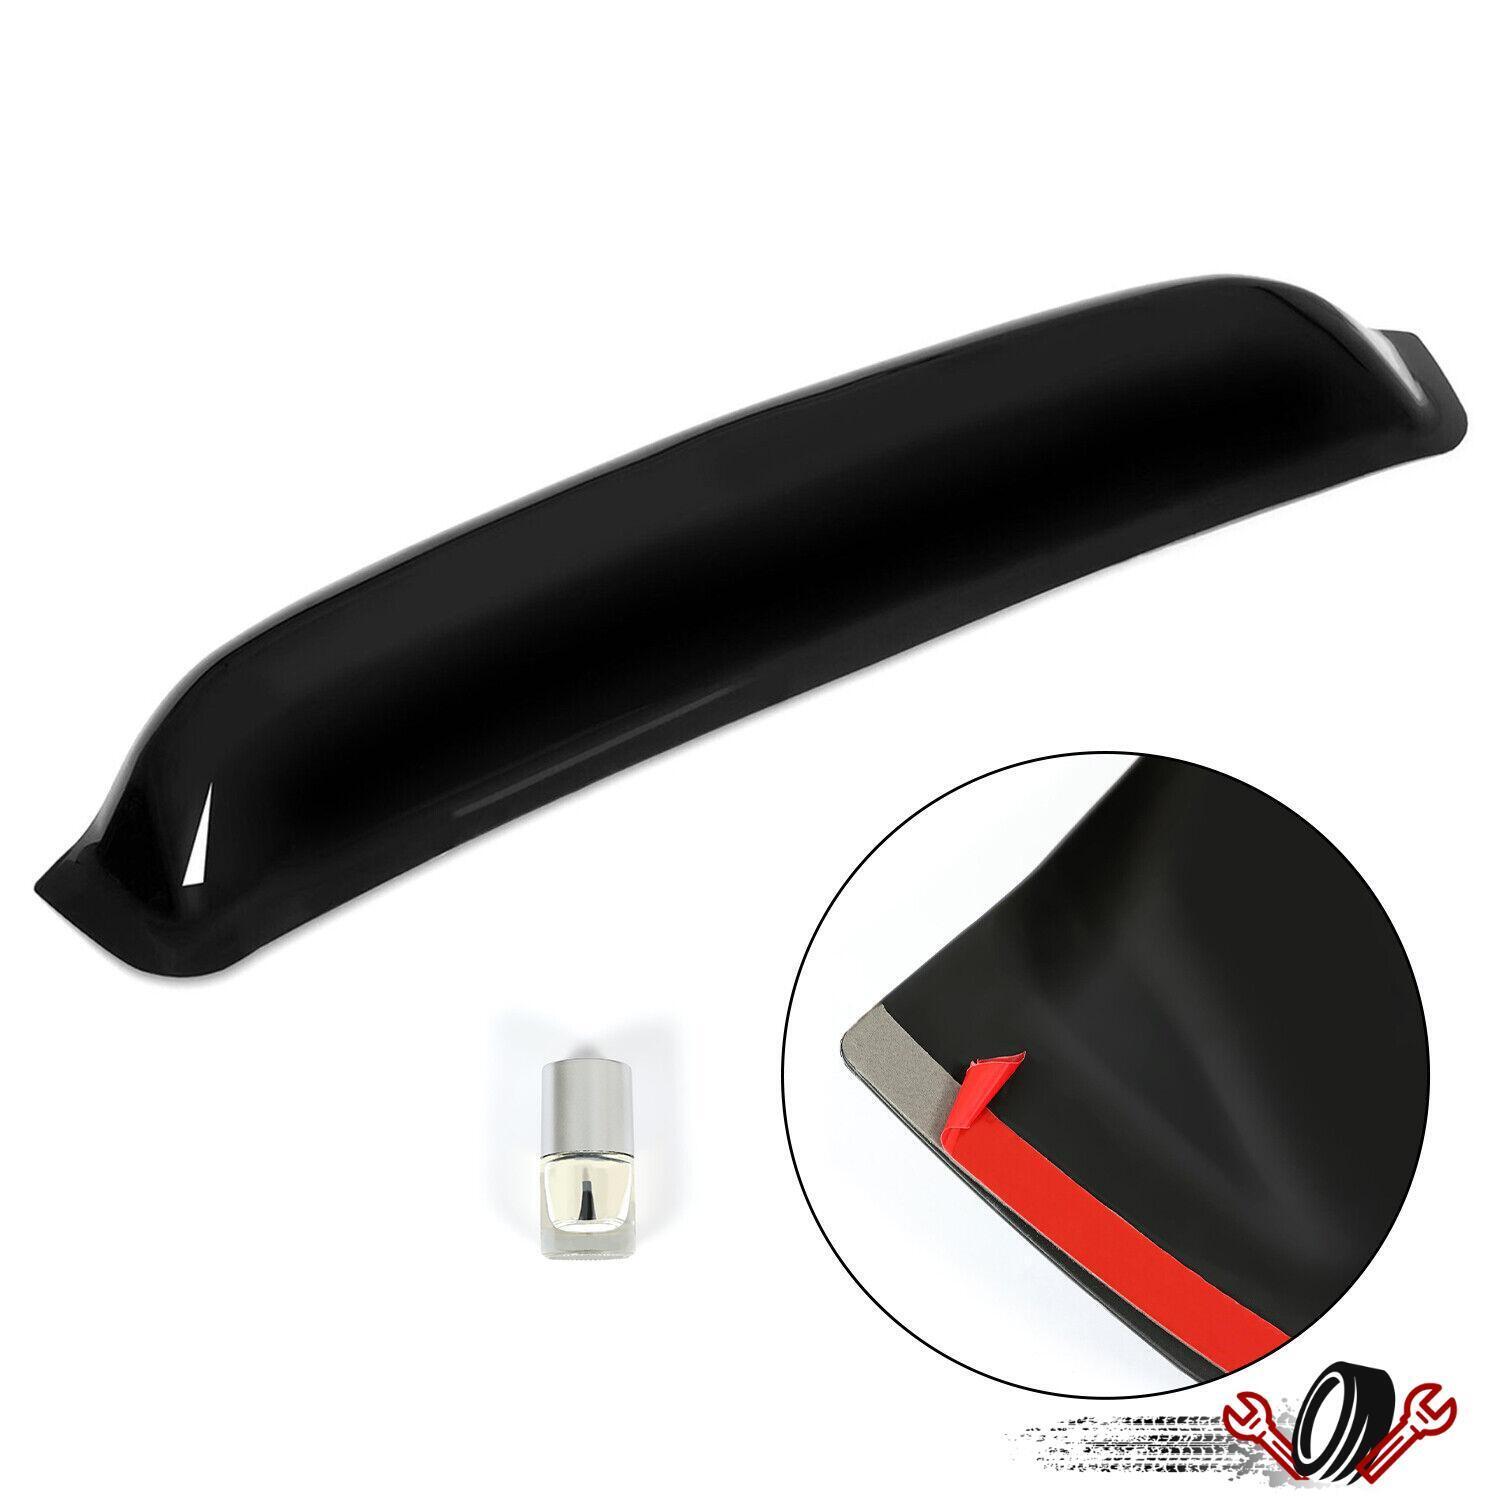 For Acura RSX 2002-2006 Painted Black Rear Roof Visor Sun Guard Spoiler Wing